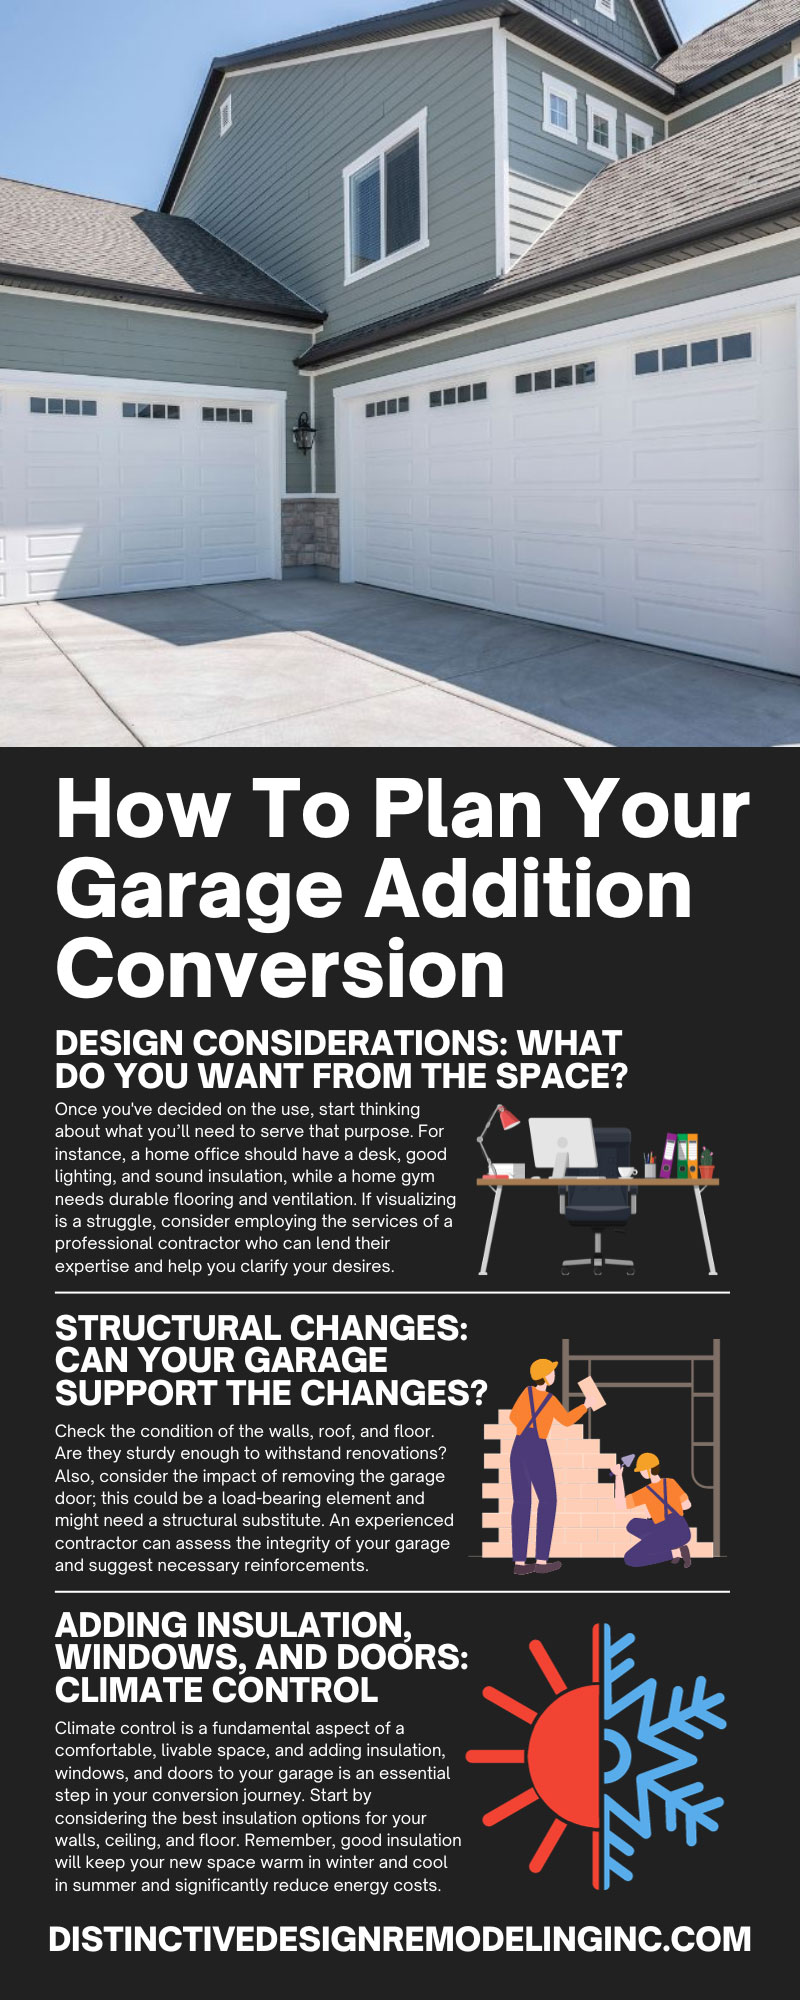 How To Plan Your Garage Addition Conversion